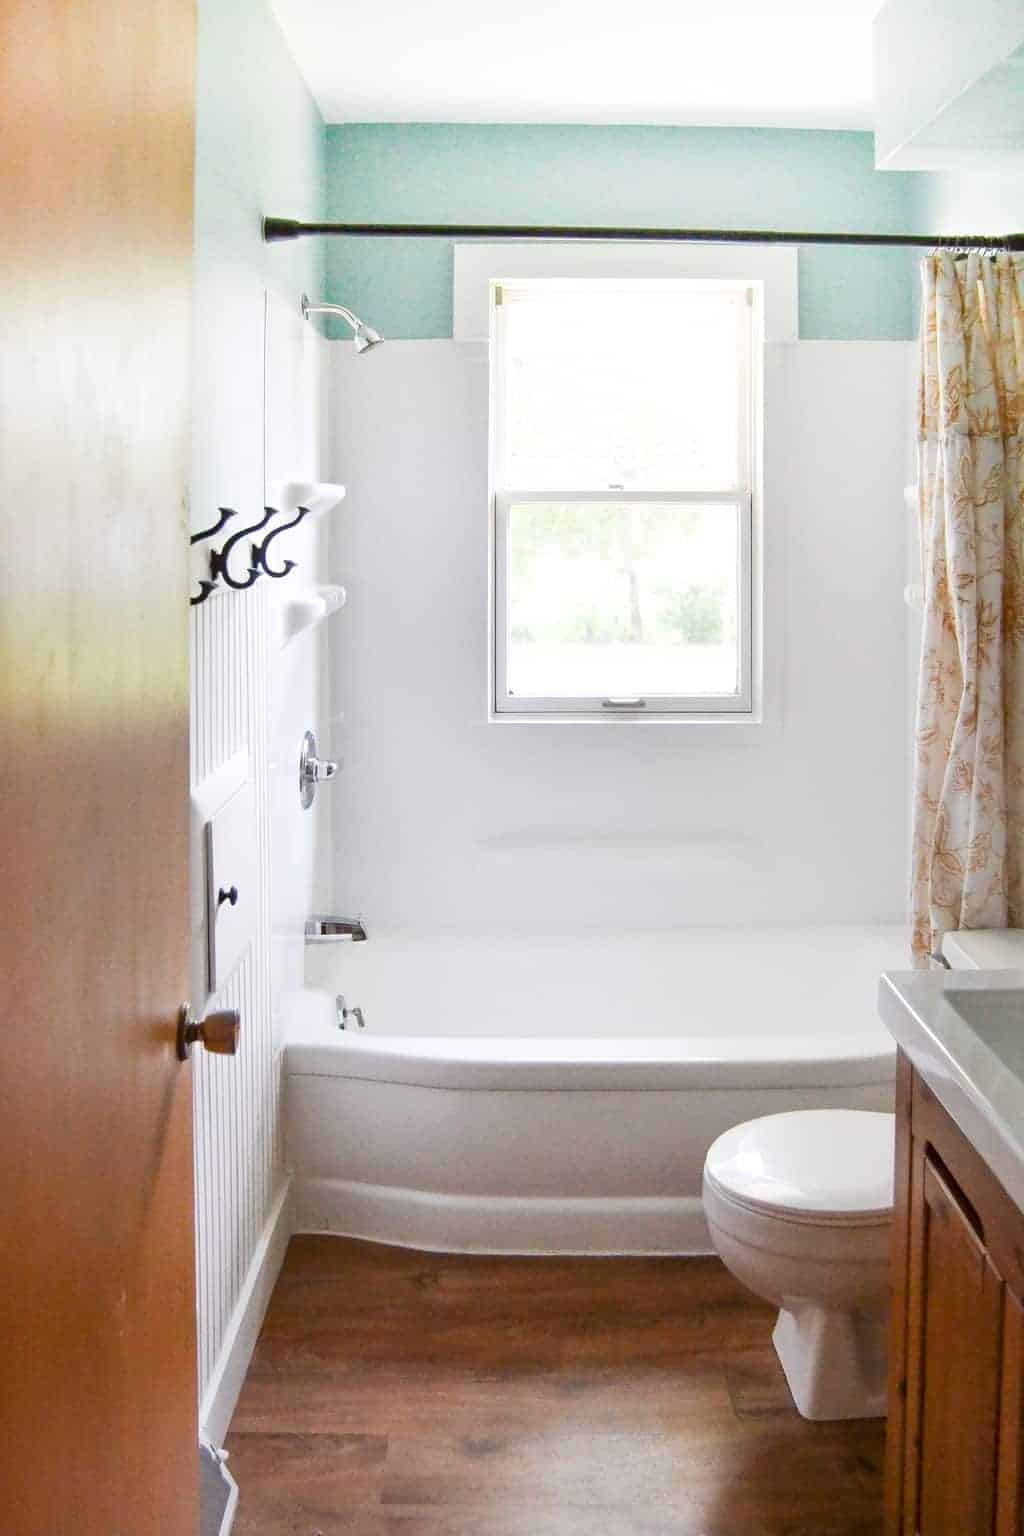 Paint A Bathtub How To Easily & Inexpensively - My Creative Days